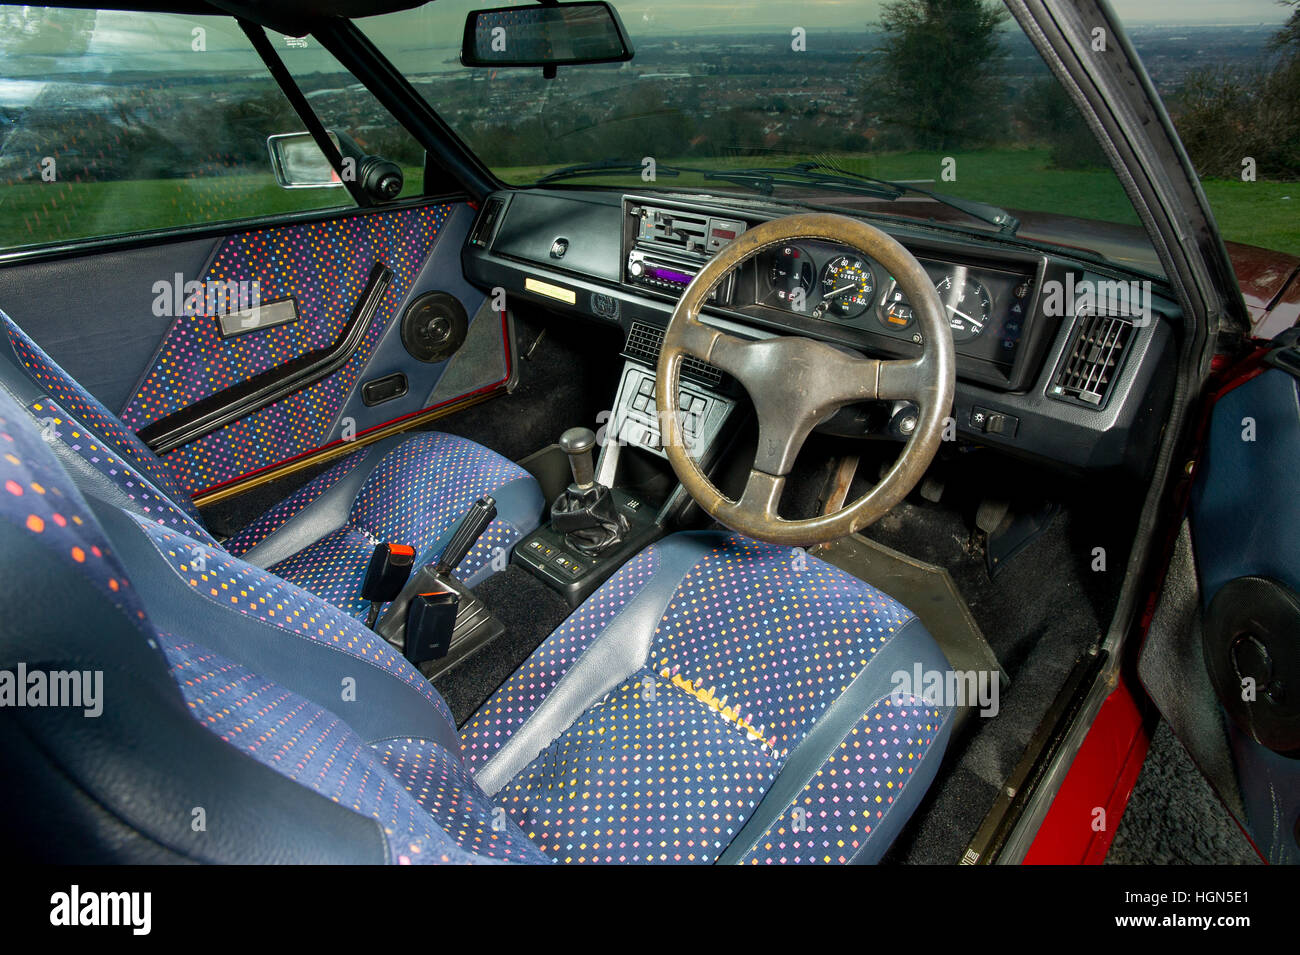 1988 Fiat X1/9 mid engined sports car, designed by Bertone, velour interior Stock Photo